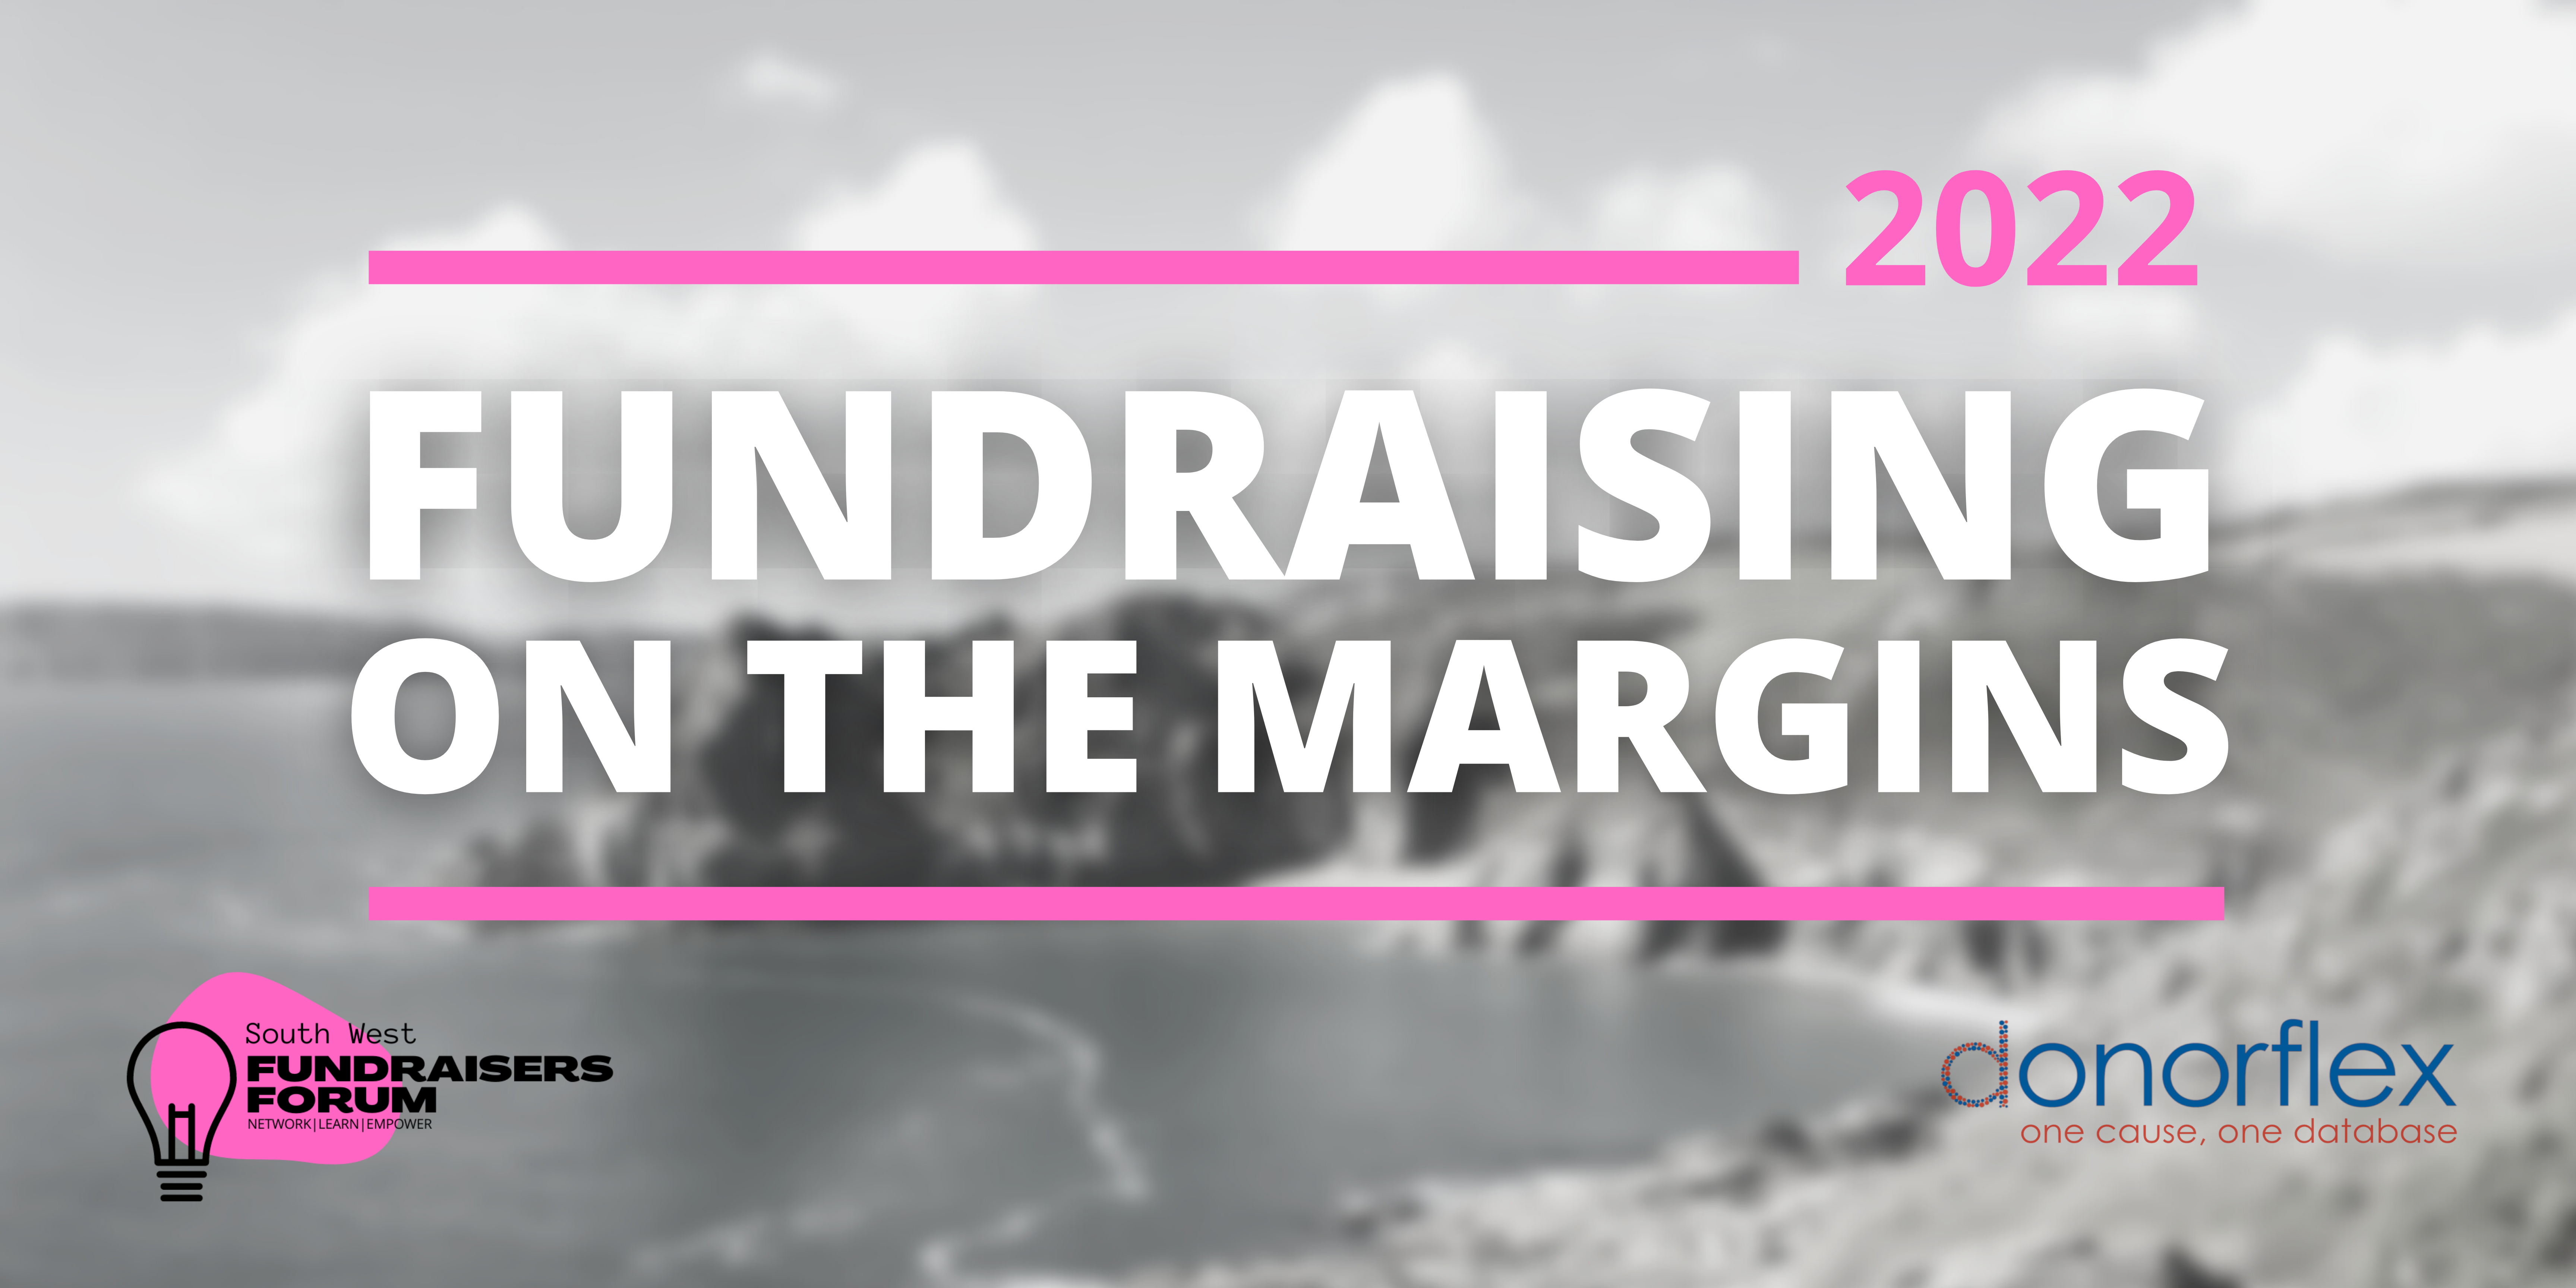 Fundraising On The Margins - South West Fundraisers Forum - Donorflex